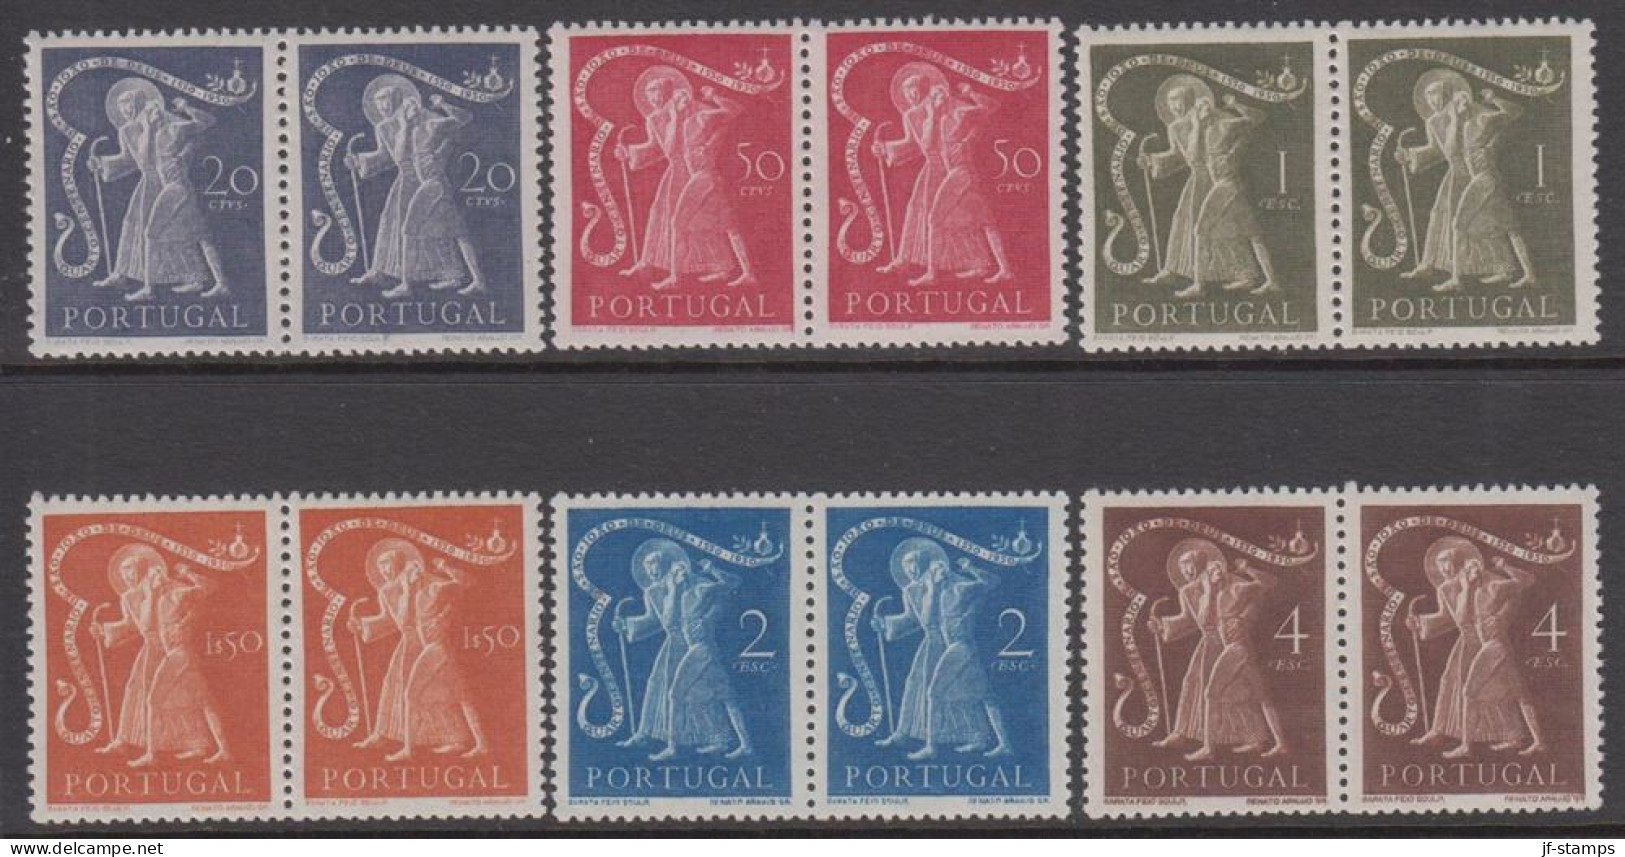 1950. PORTUGAL. JOAO DE DEUS. Complete Set With 6 Stamps In Pairs. Never Hinged. Beautifu... (Michel 752-757) - JF539234 - Ungebraucht